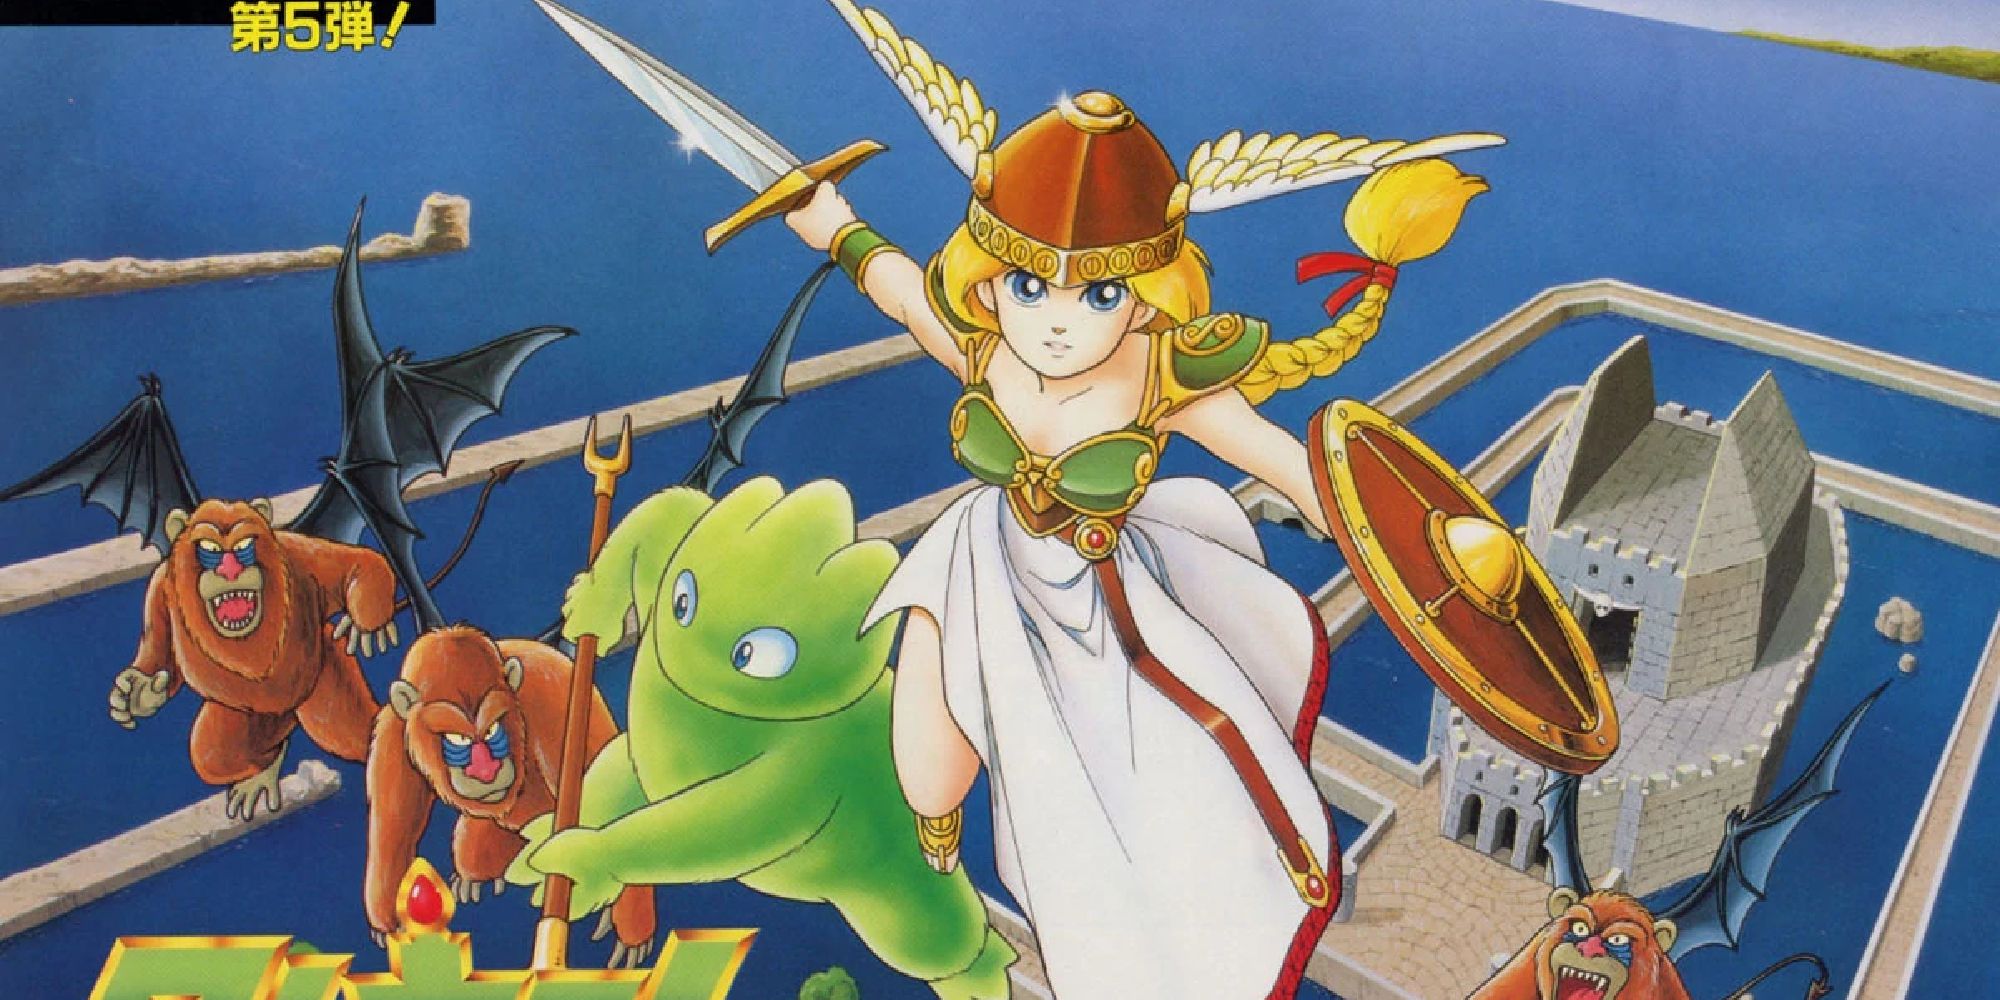 Character art for Valkyrie No Densetsu, showing the titular Valkryie swinging her sword while enemies chase her